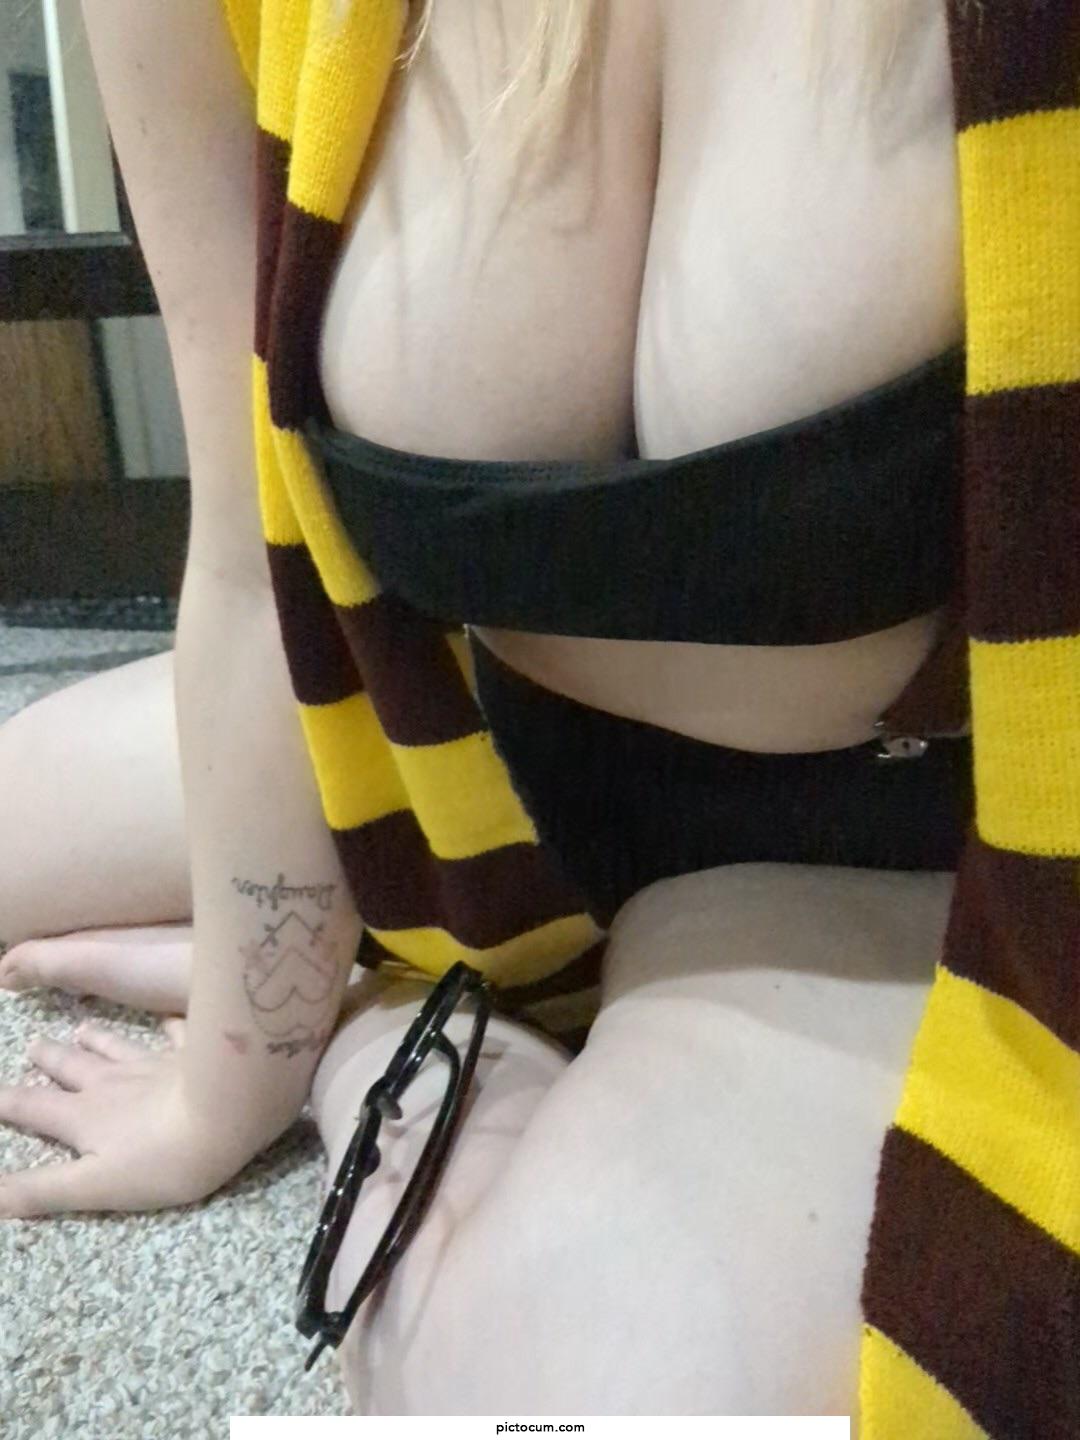 Hermione can show off her tits right?😋💕